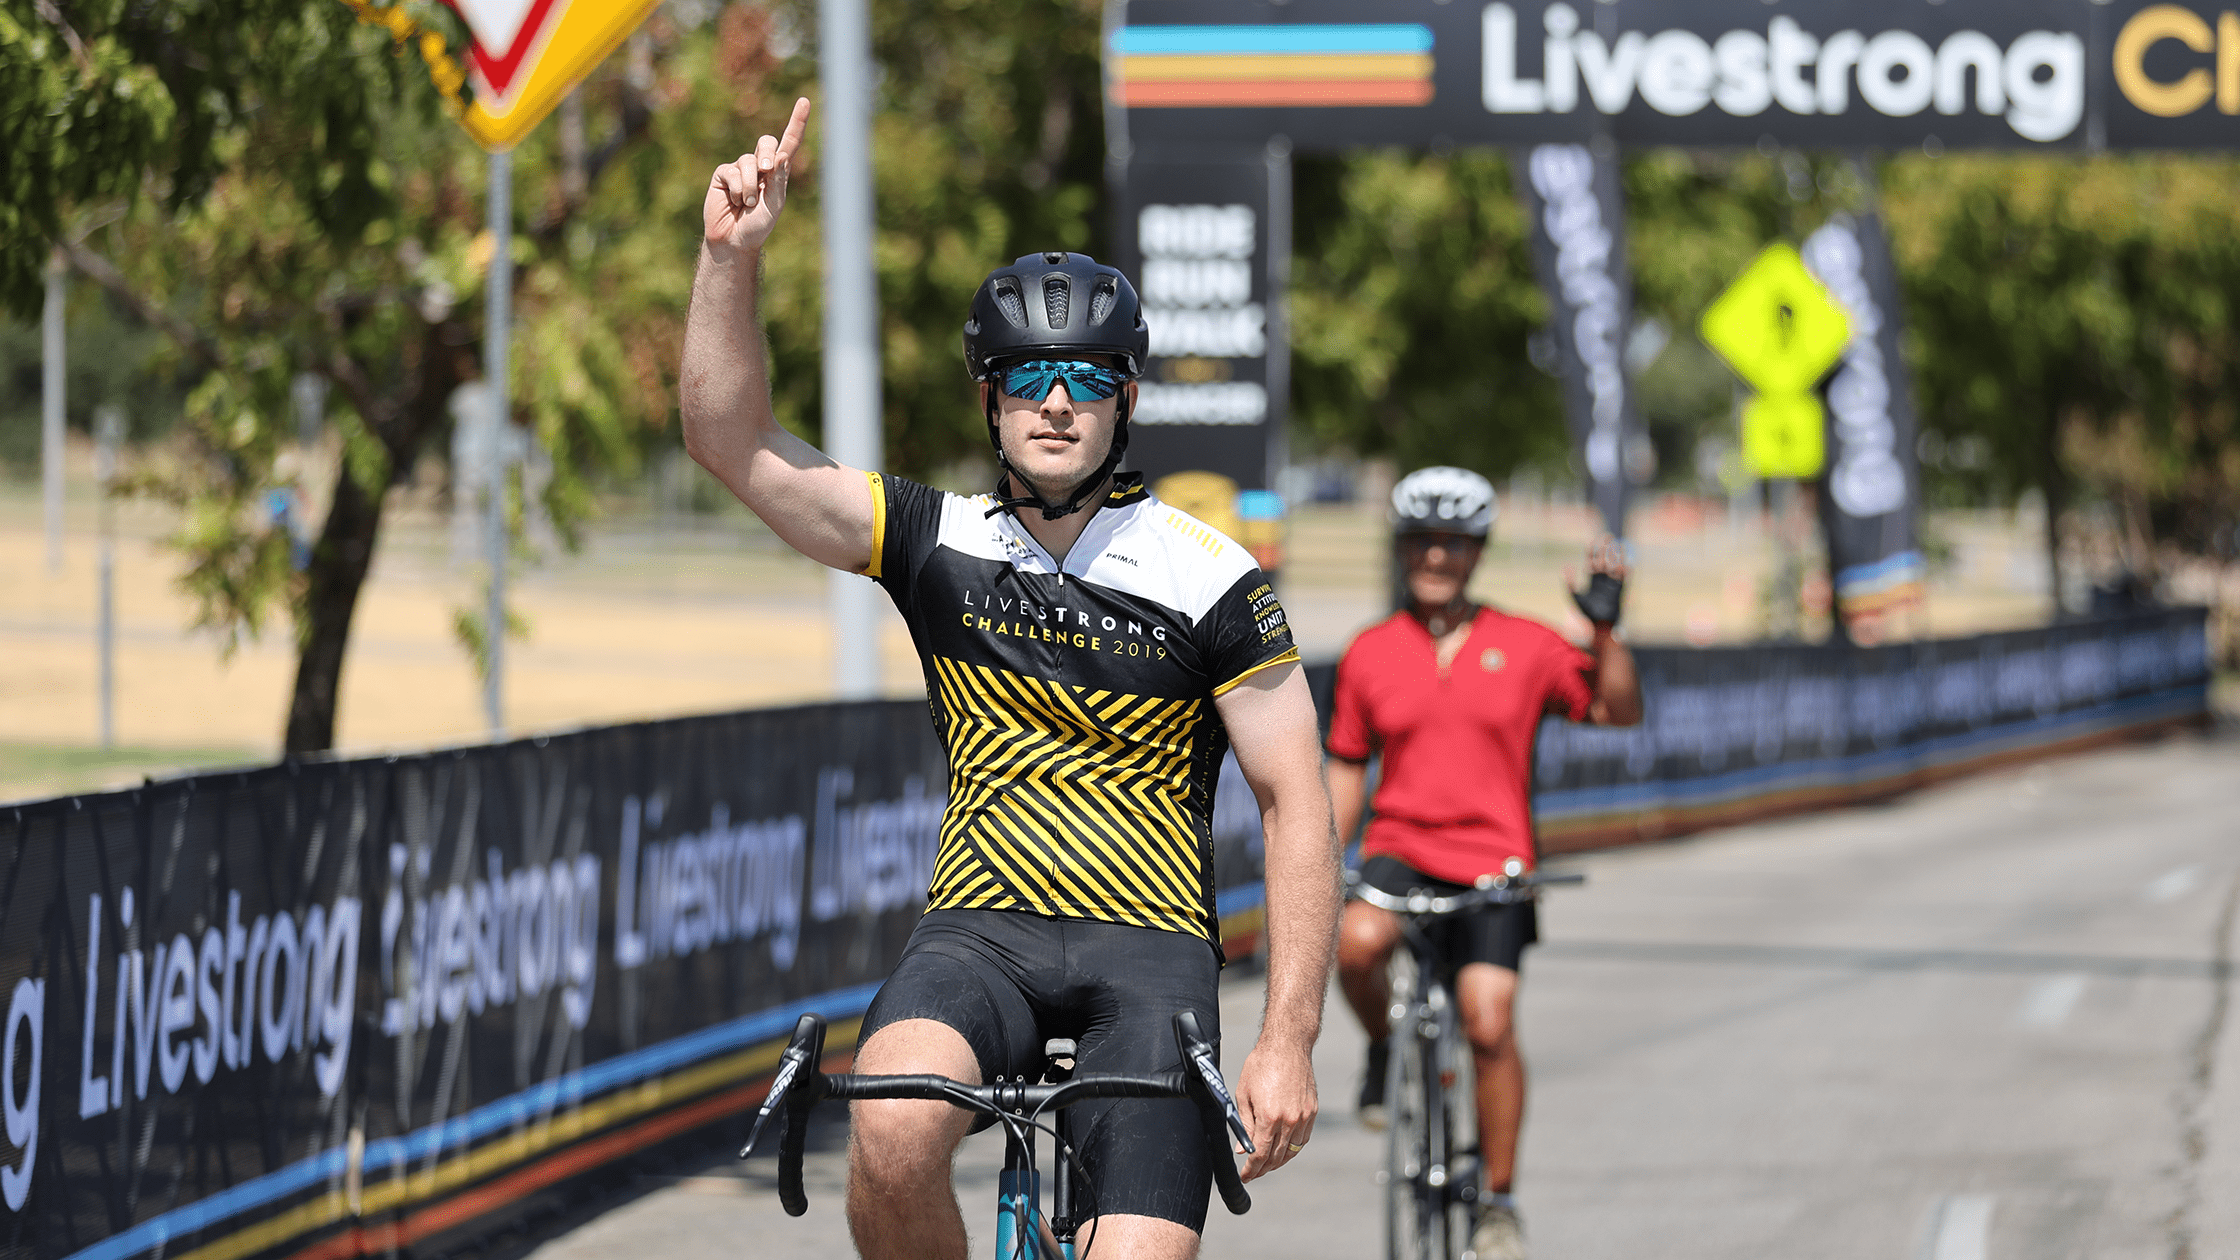 Cyclist points to the sky after crossing finish line